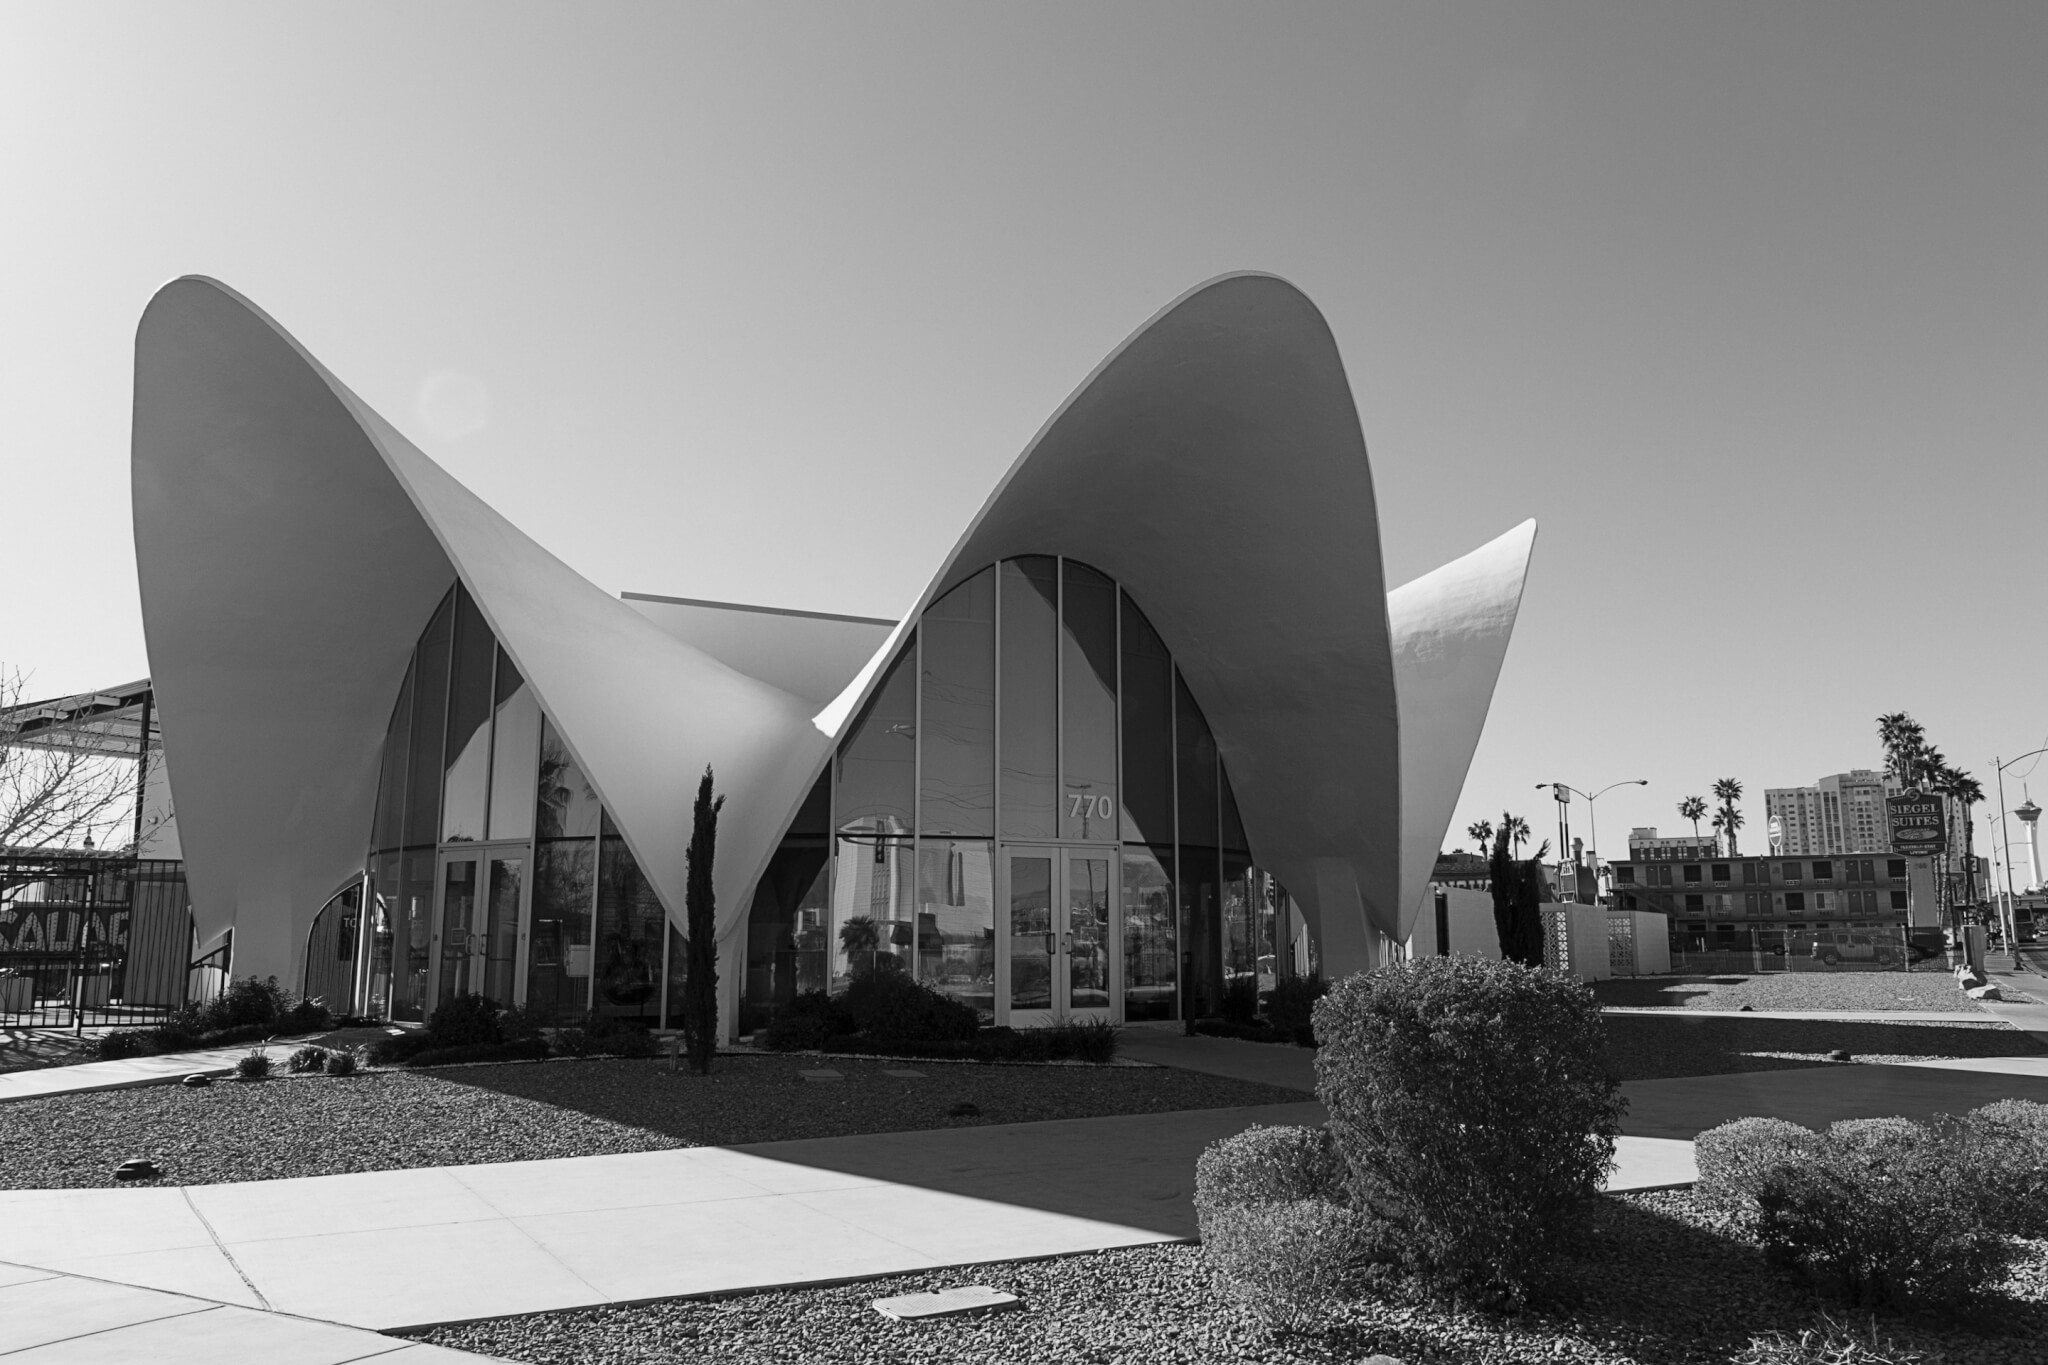 B&W photo of a midcentury building with a swooping roof